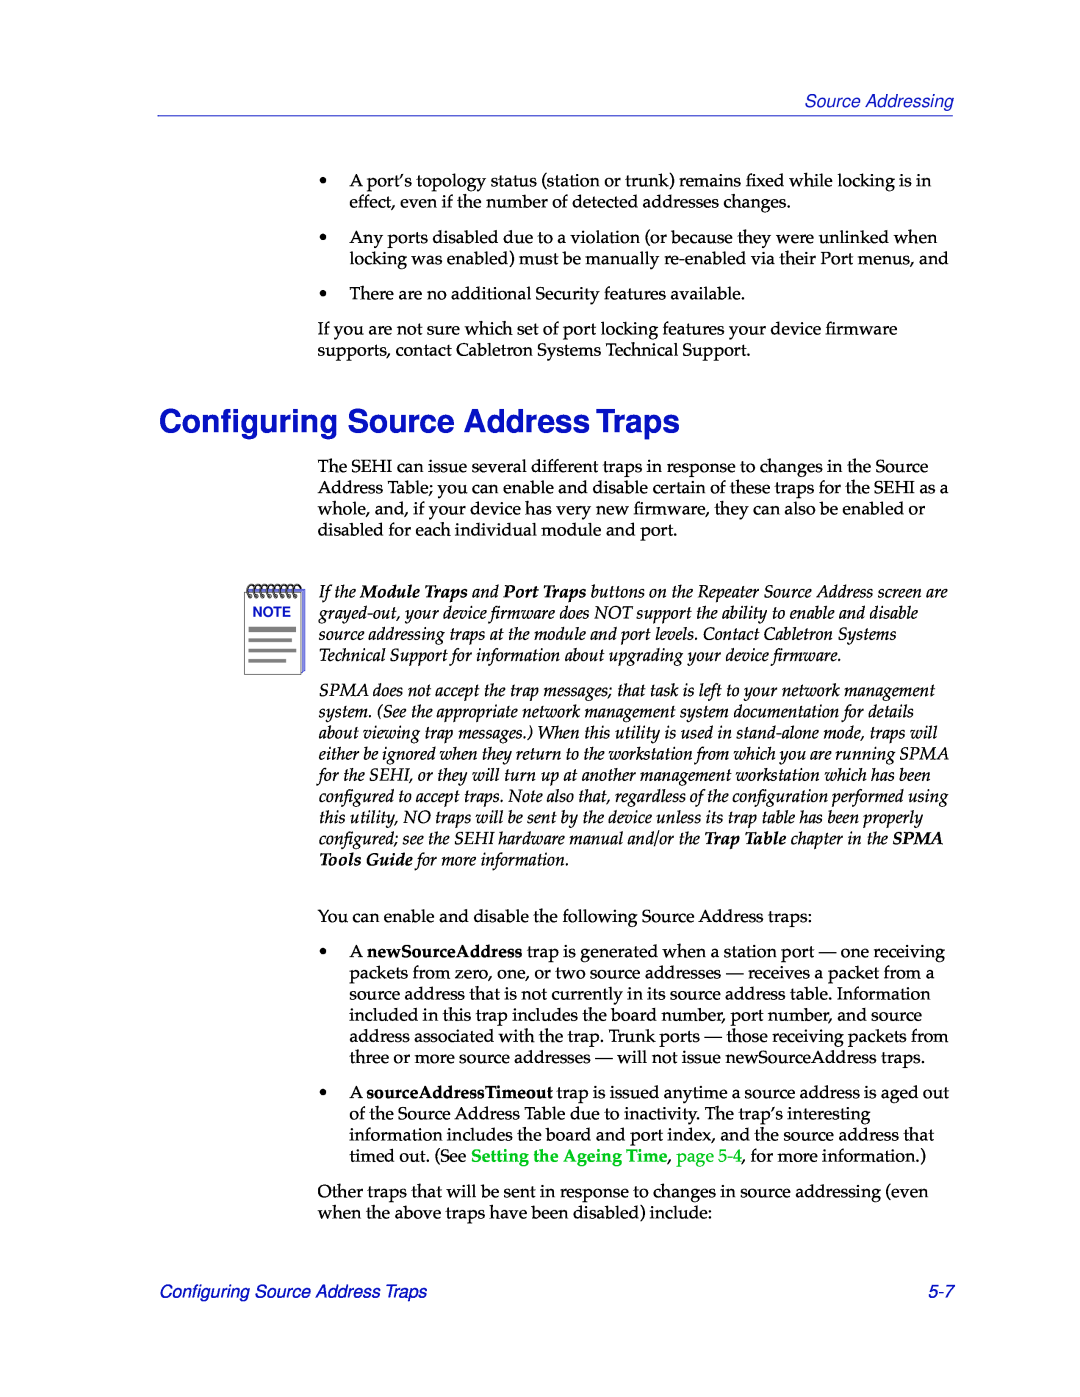 Cabletron Systems SEHI-22/24, SEHI-32/34 manual Conﬁguring Source Address Traps, Source Addressing 